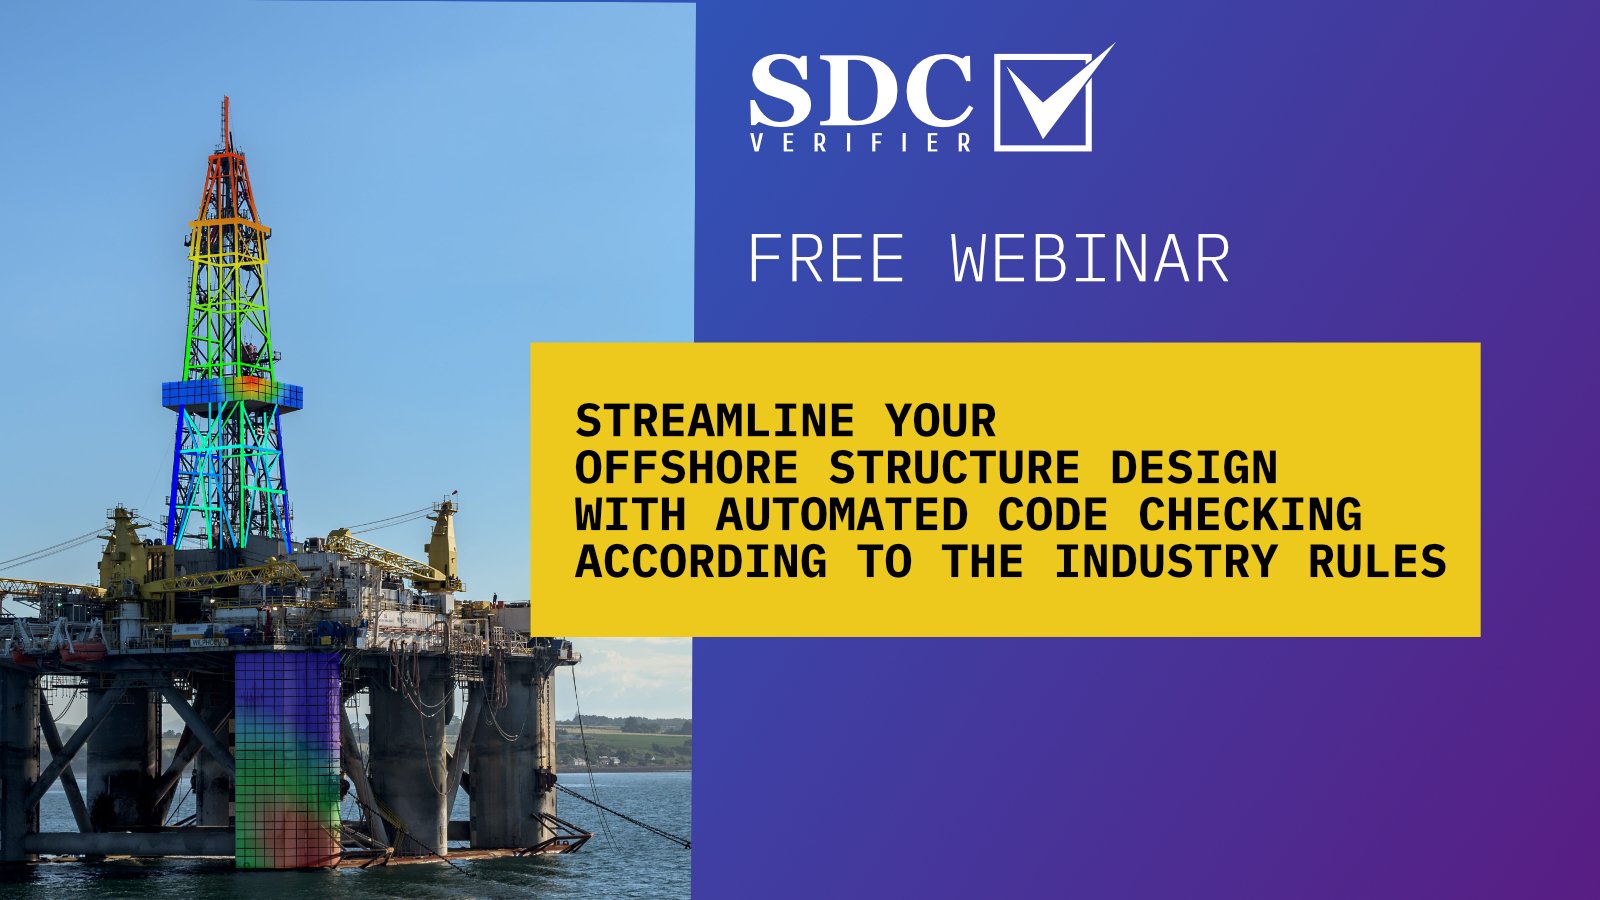 Streamline Your Offshore Structure Design with Automated Code Checking according to the Industry Rules